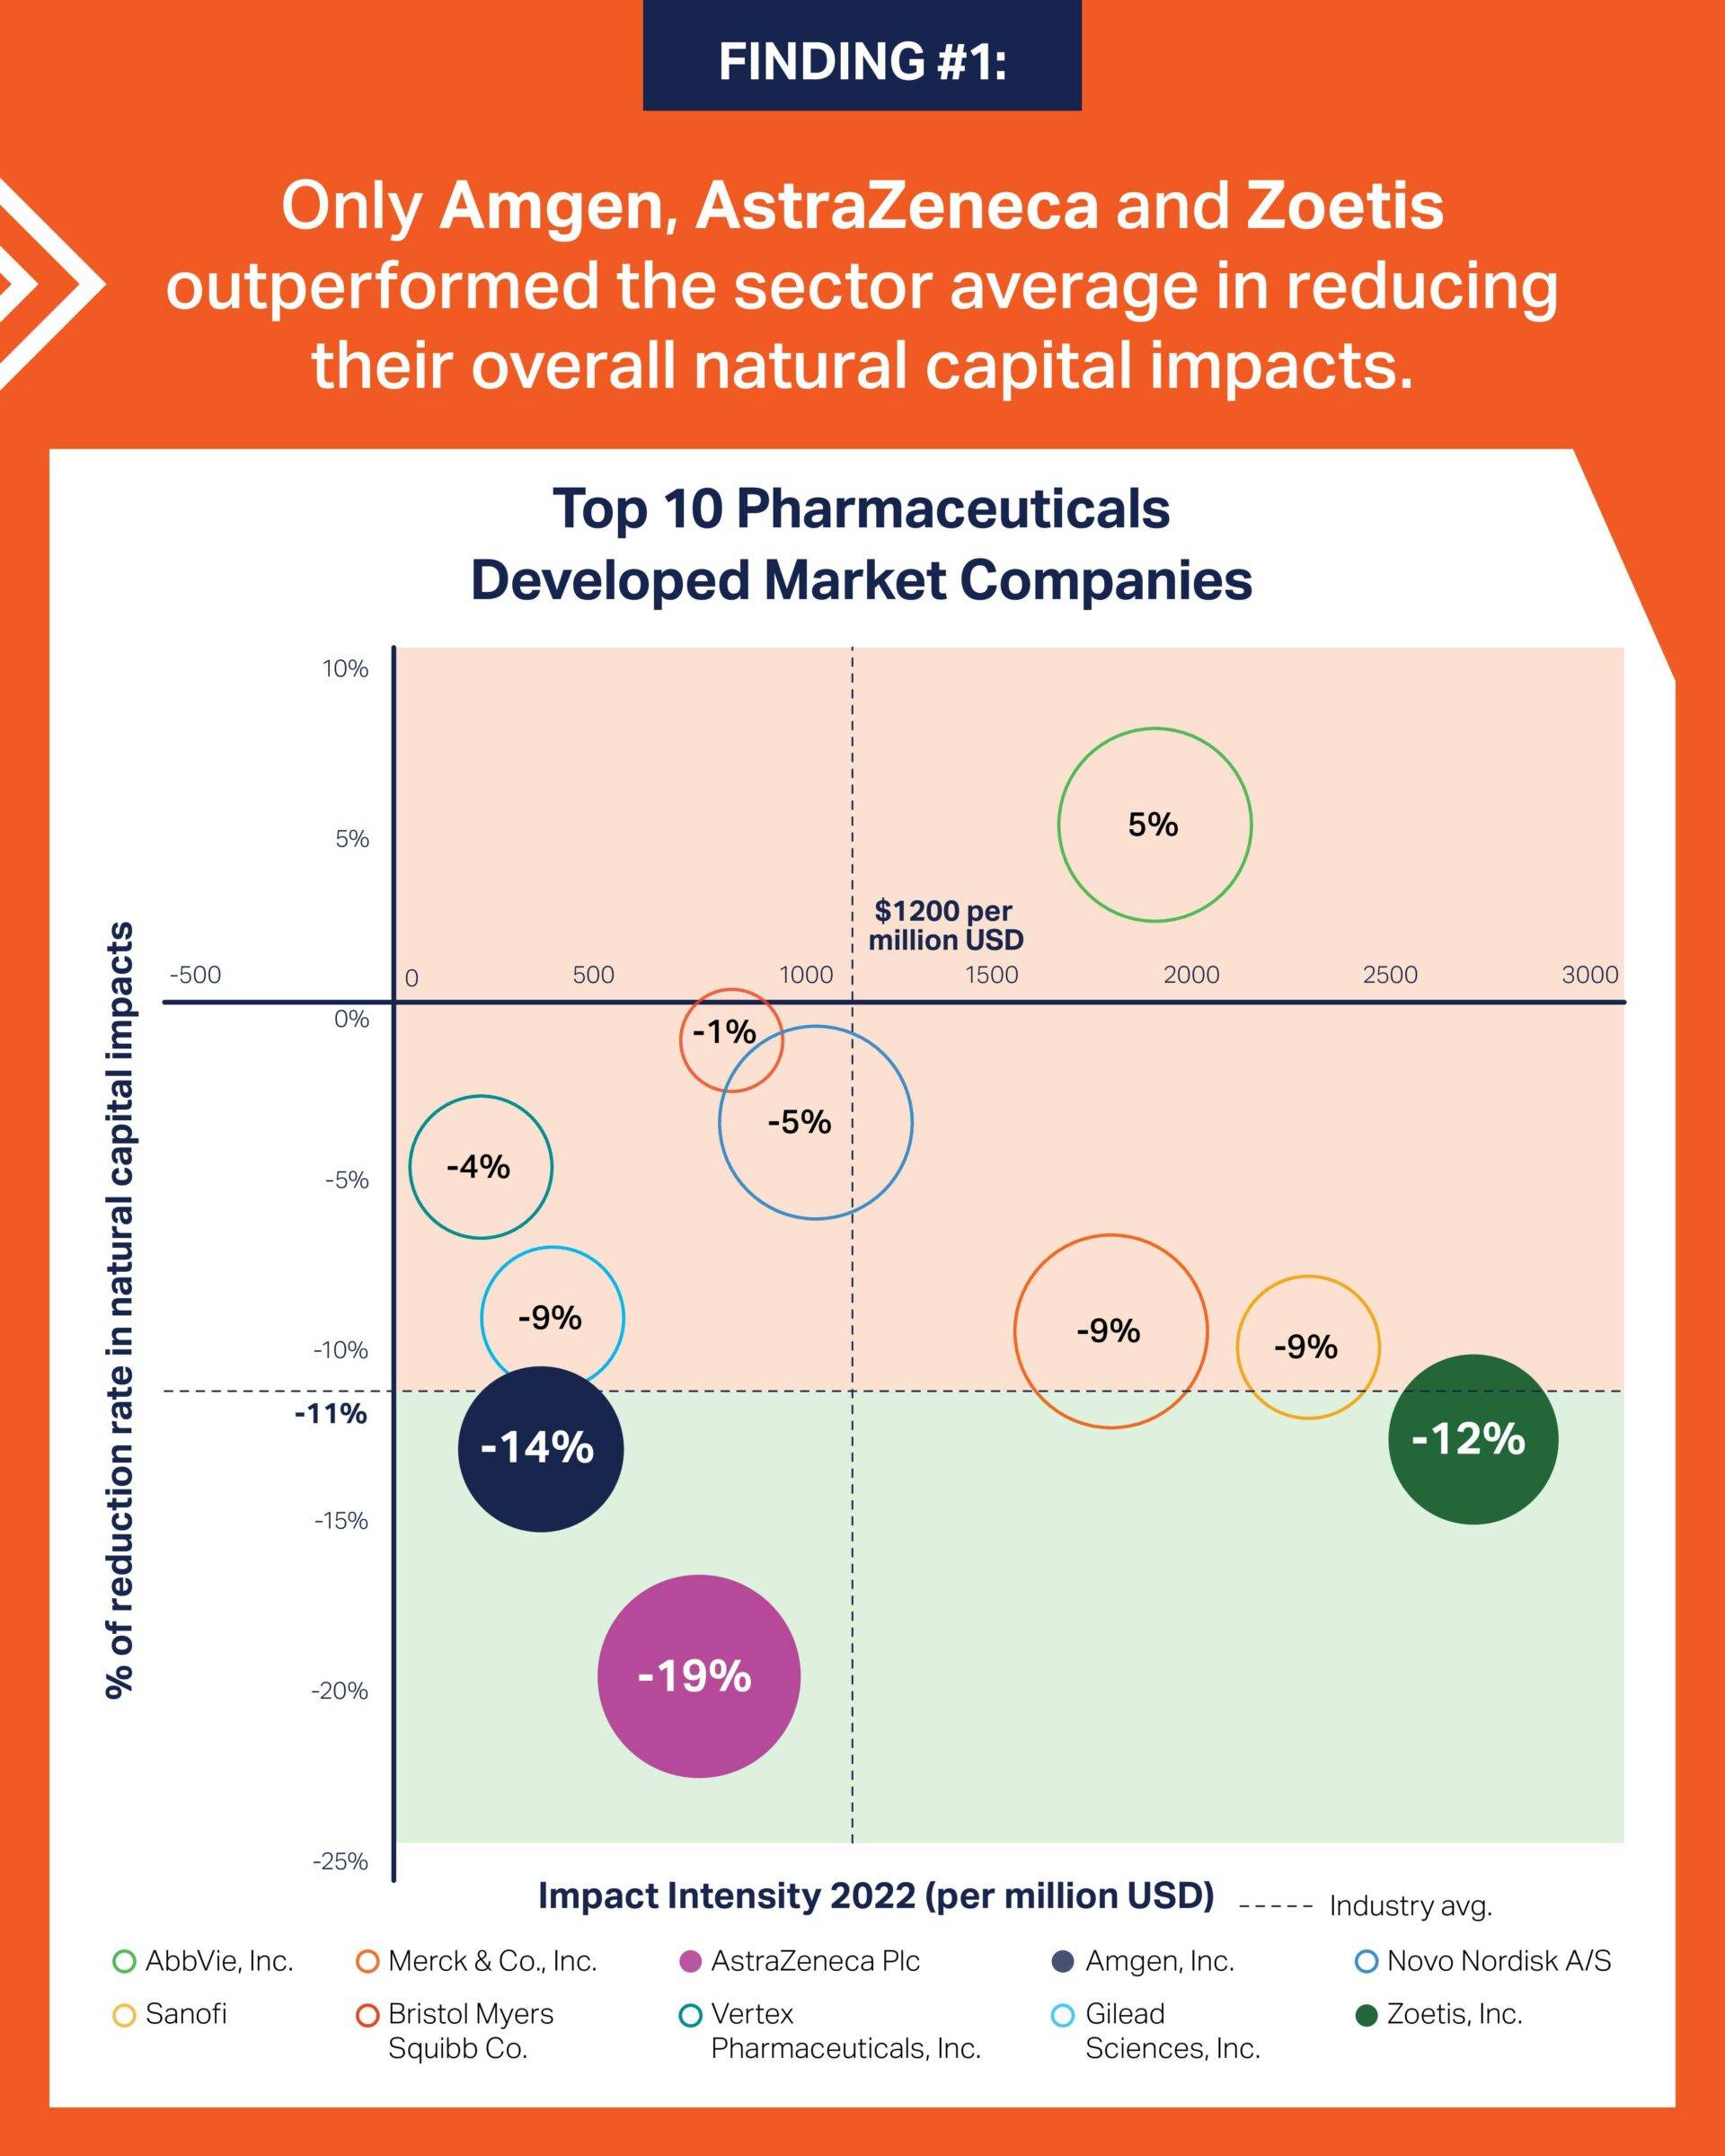 Assessing Pharma's Environmental Impact - Part 1 - How successful have the top pharmaceutical companies been in reducing their natural capital impacts?